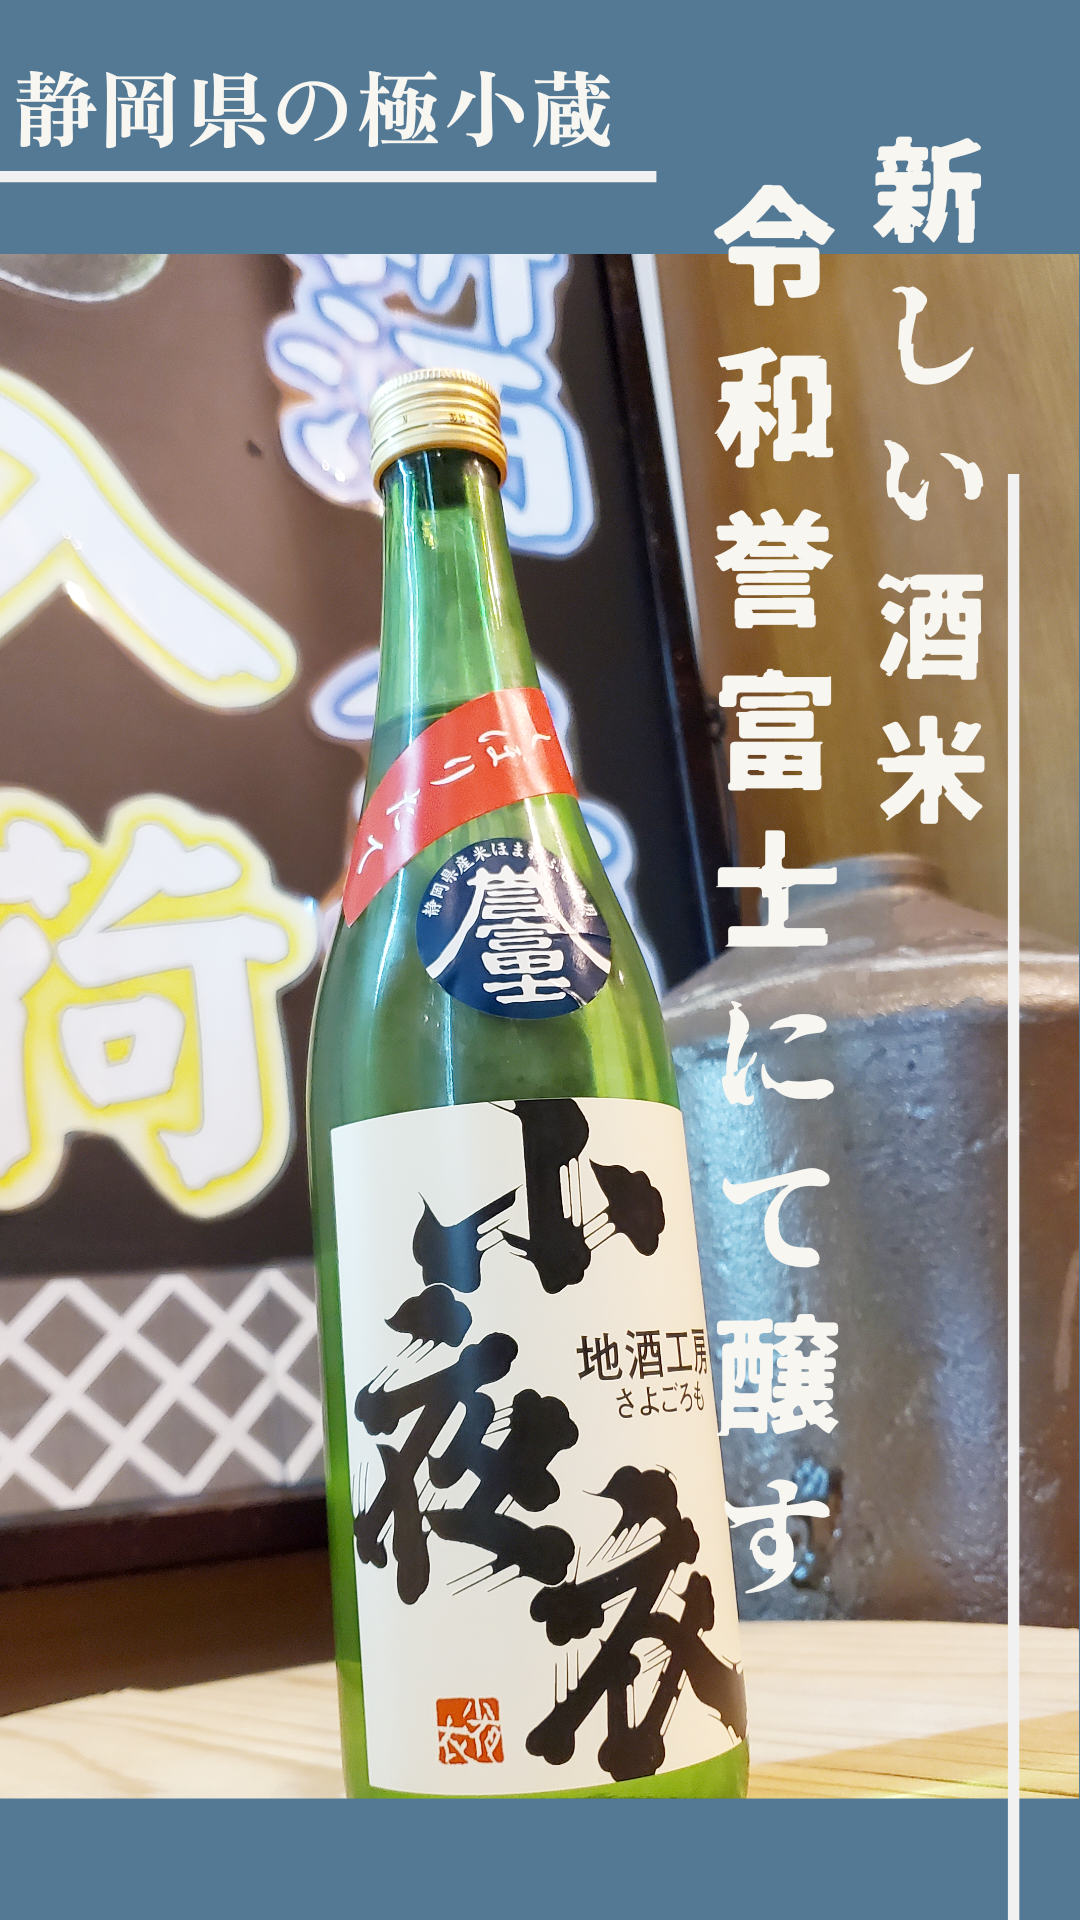 You are currently viewing 小さな蔵、森本酒造醸す新酒しぼりたて